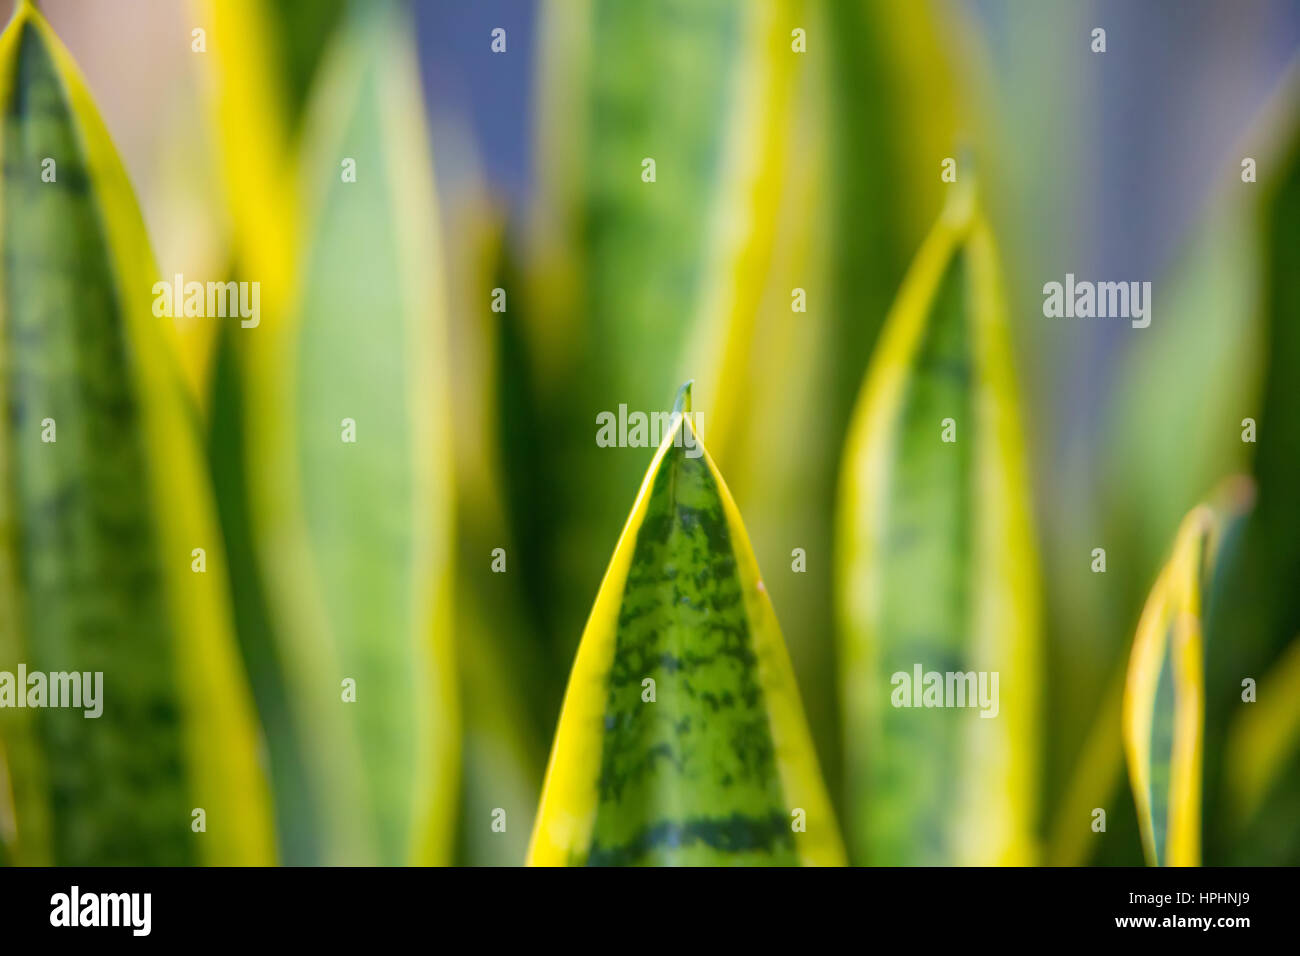 Green leaves with yellow strips background with soft selective focus on leaves Stock Photo